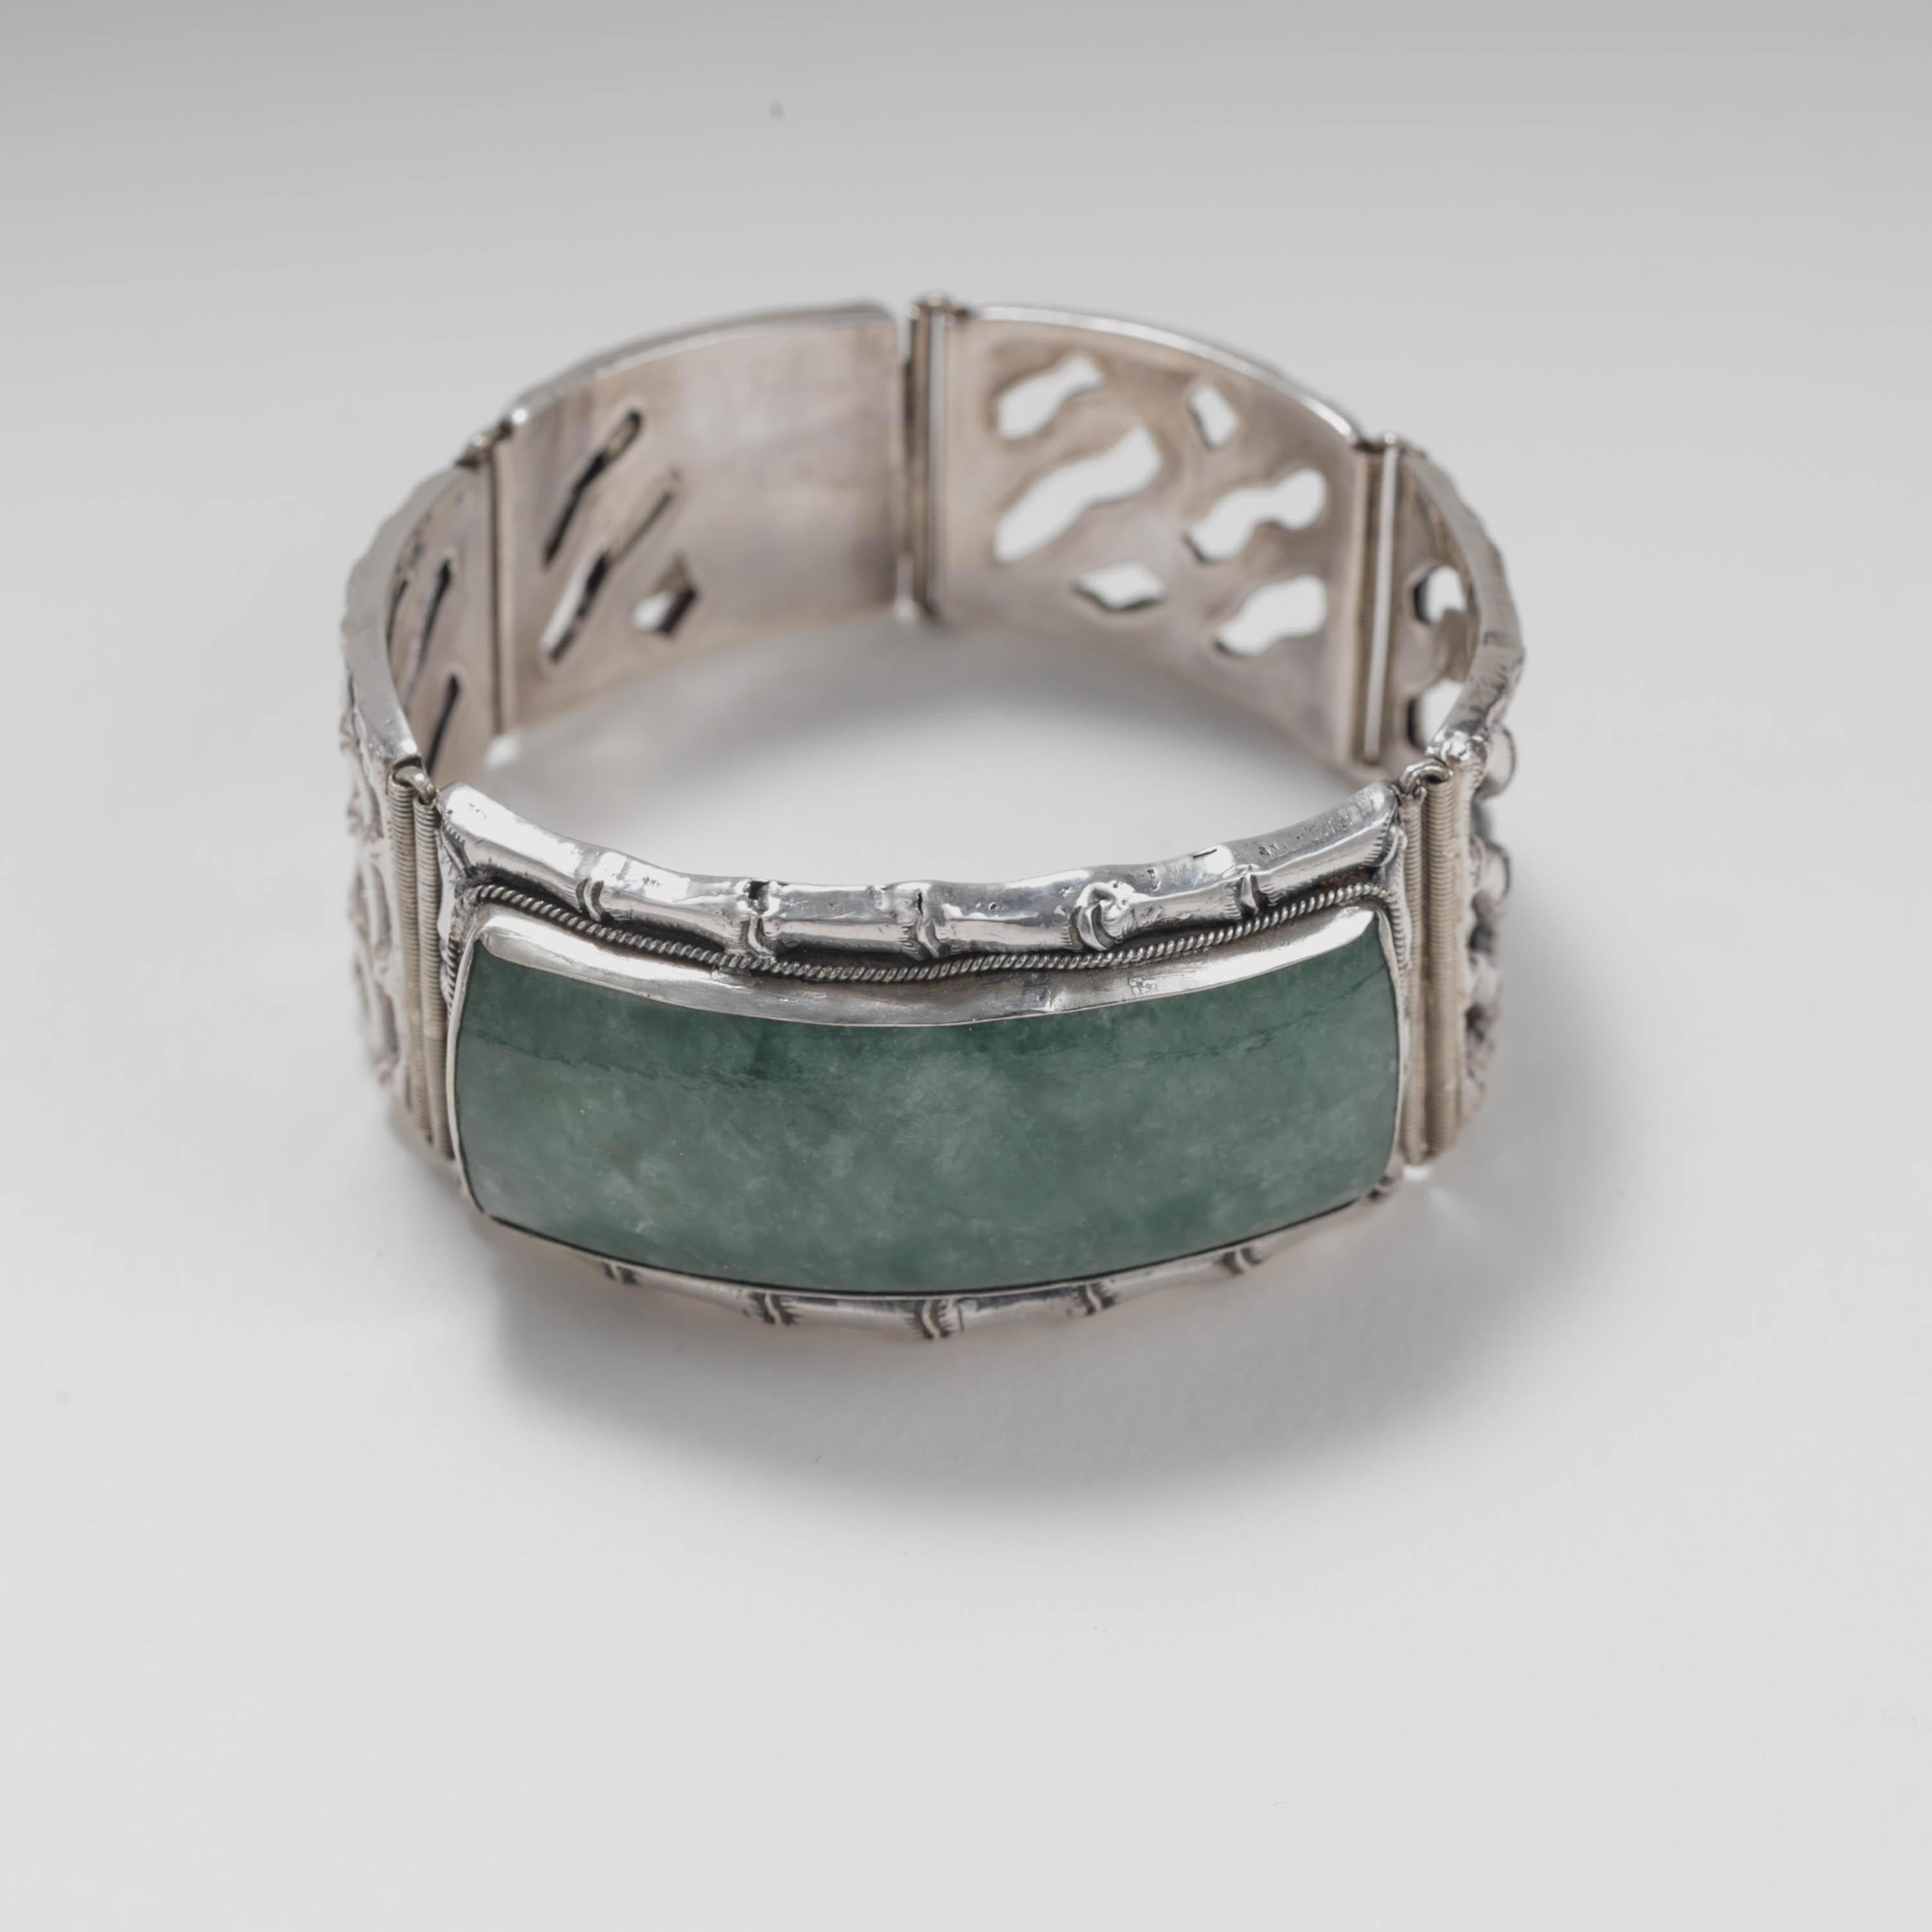 This is such a terrific unisex handmade bracelet: weighty, substantial, and very well-made in China in the 1960s. Crafted entirely in sterling silver, the bracelet is composed of 5 silver panels, each created in a bamboo motif. The central panel